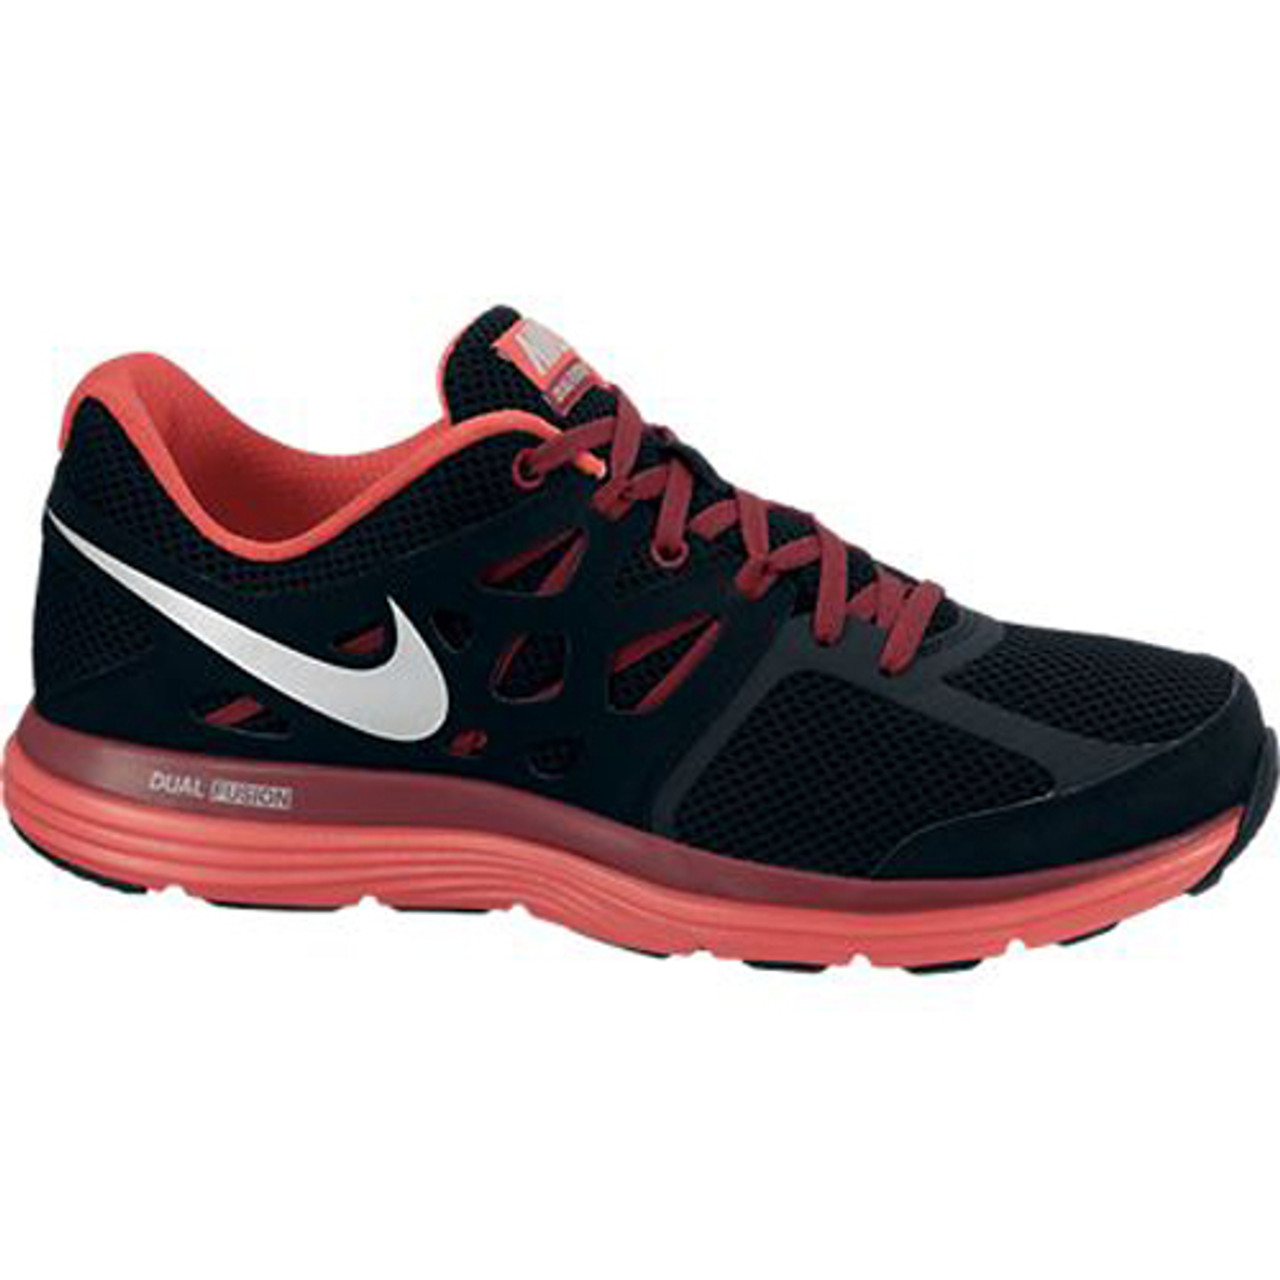 Teseo sin cable Disminución New Nike Dual Fusion Lite Black/Red Mens Running Shoes - Black/Team Red/Challenge  Red/Silver | Discount Nike Men's Athletic & More - Shoolu.com | Shoolu.com